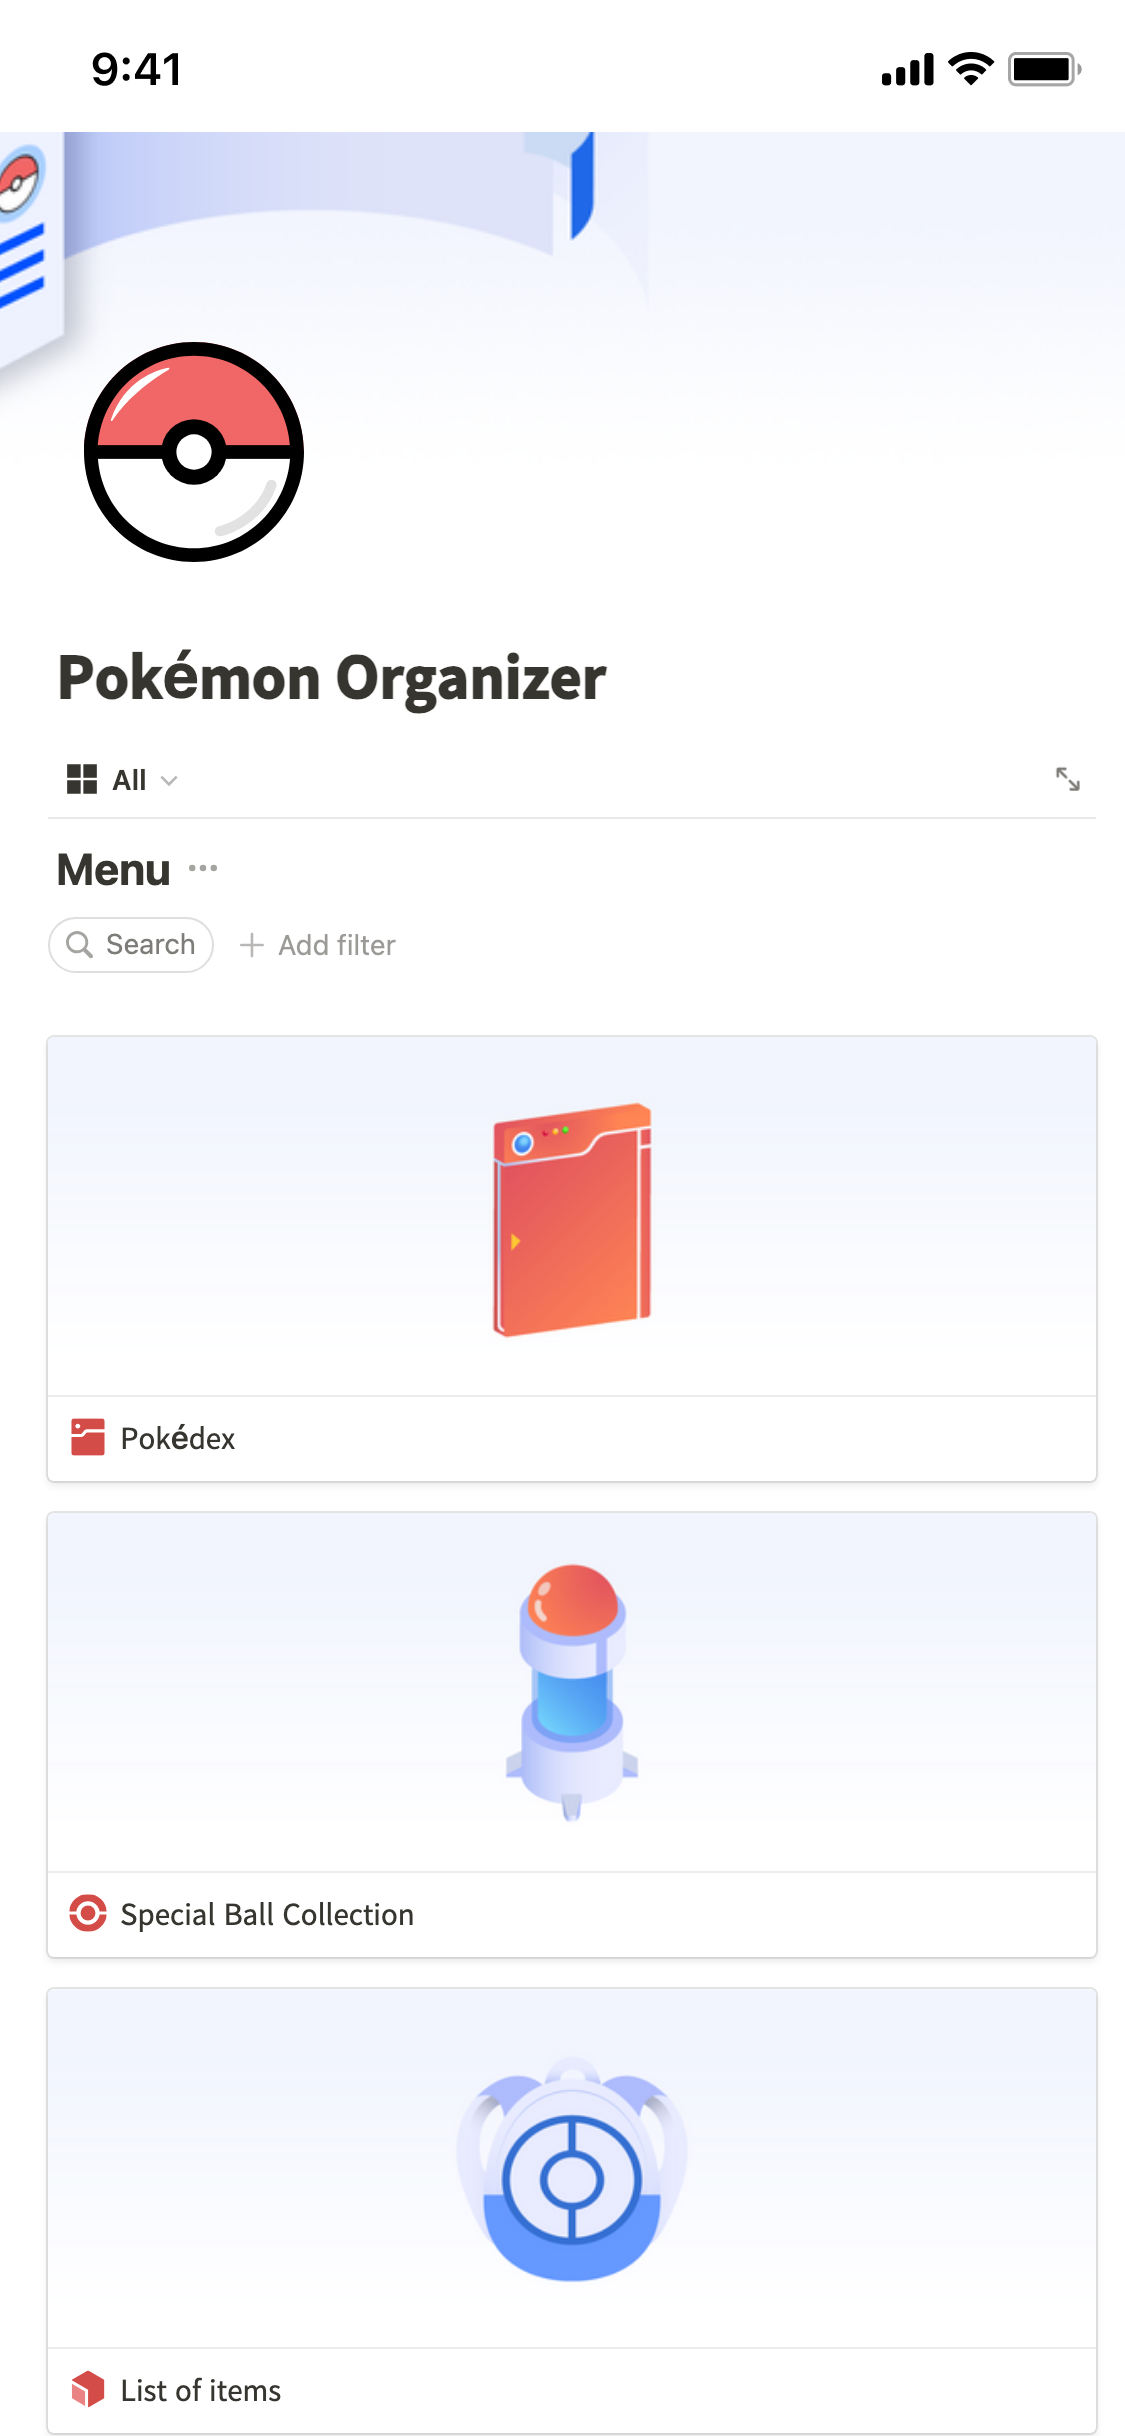 Pokedex designs, themes, templates and downloadable graphic